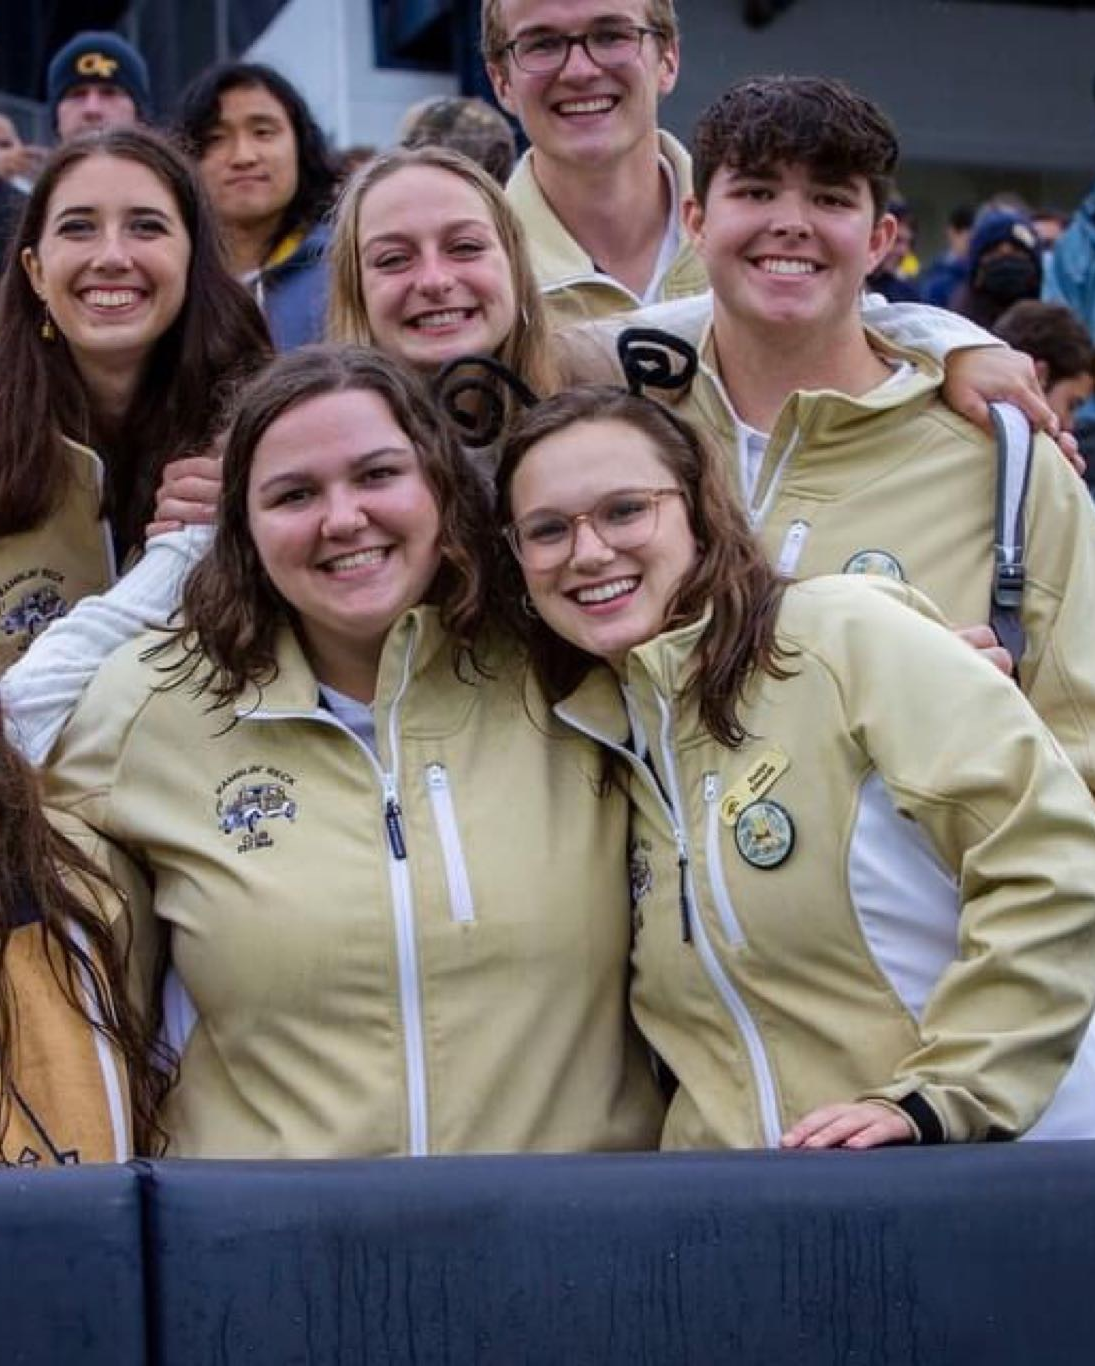 Members of RRC posing in the RRC section at a football game during the 2021 football season.